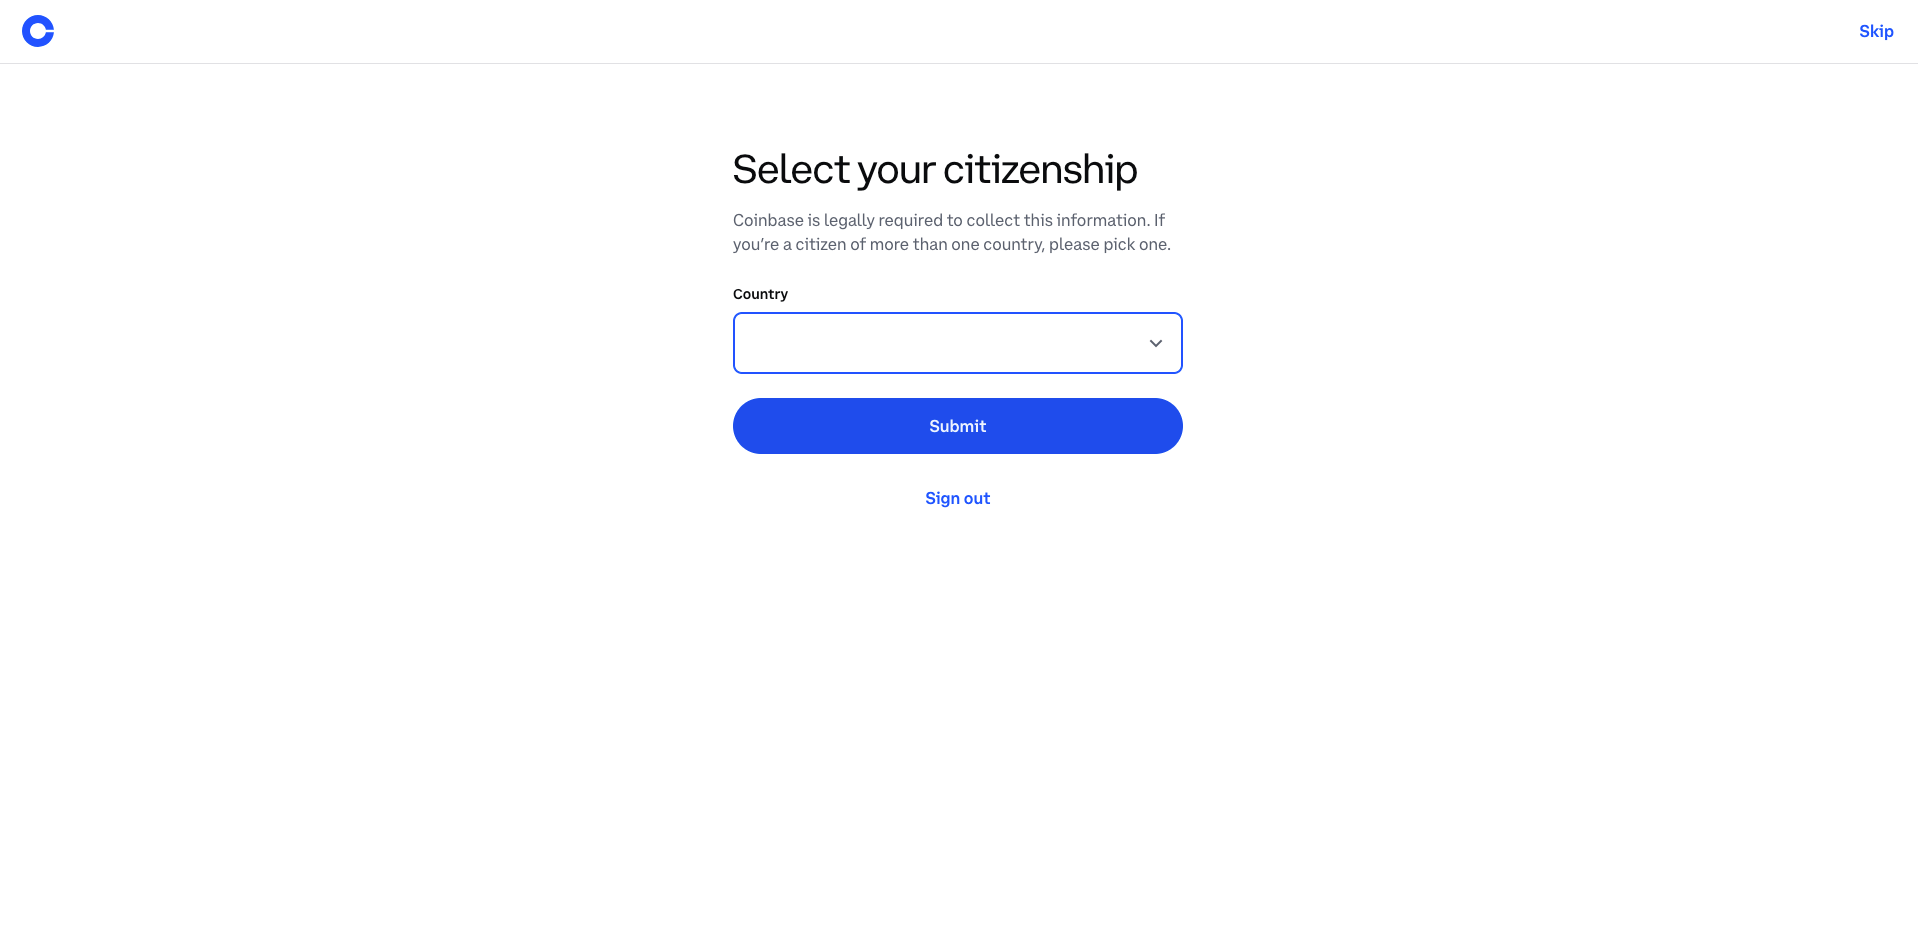 8. Select your citizenship;  